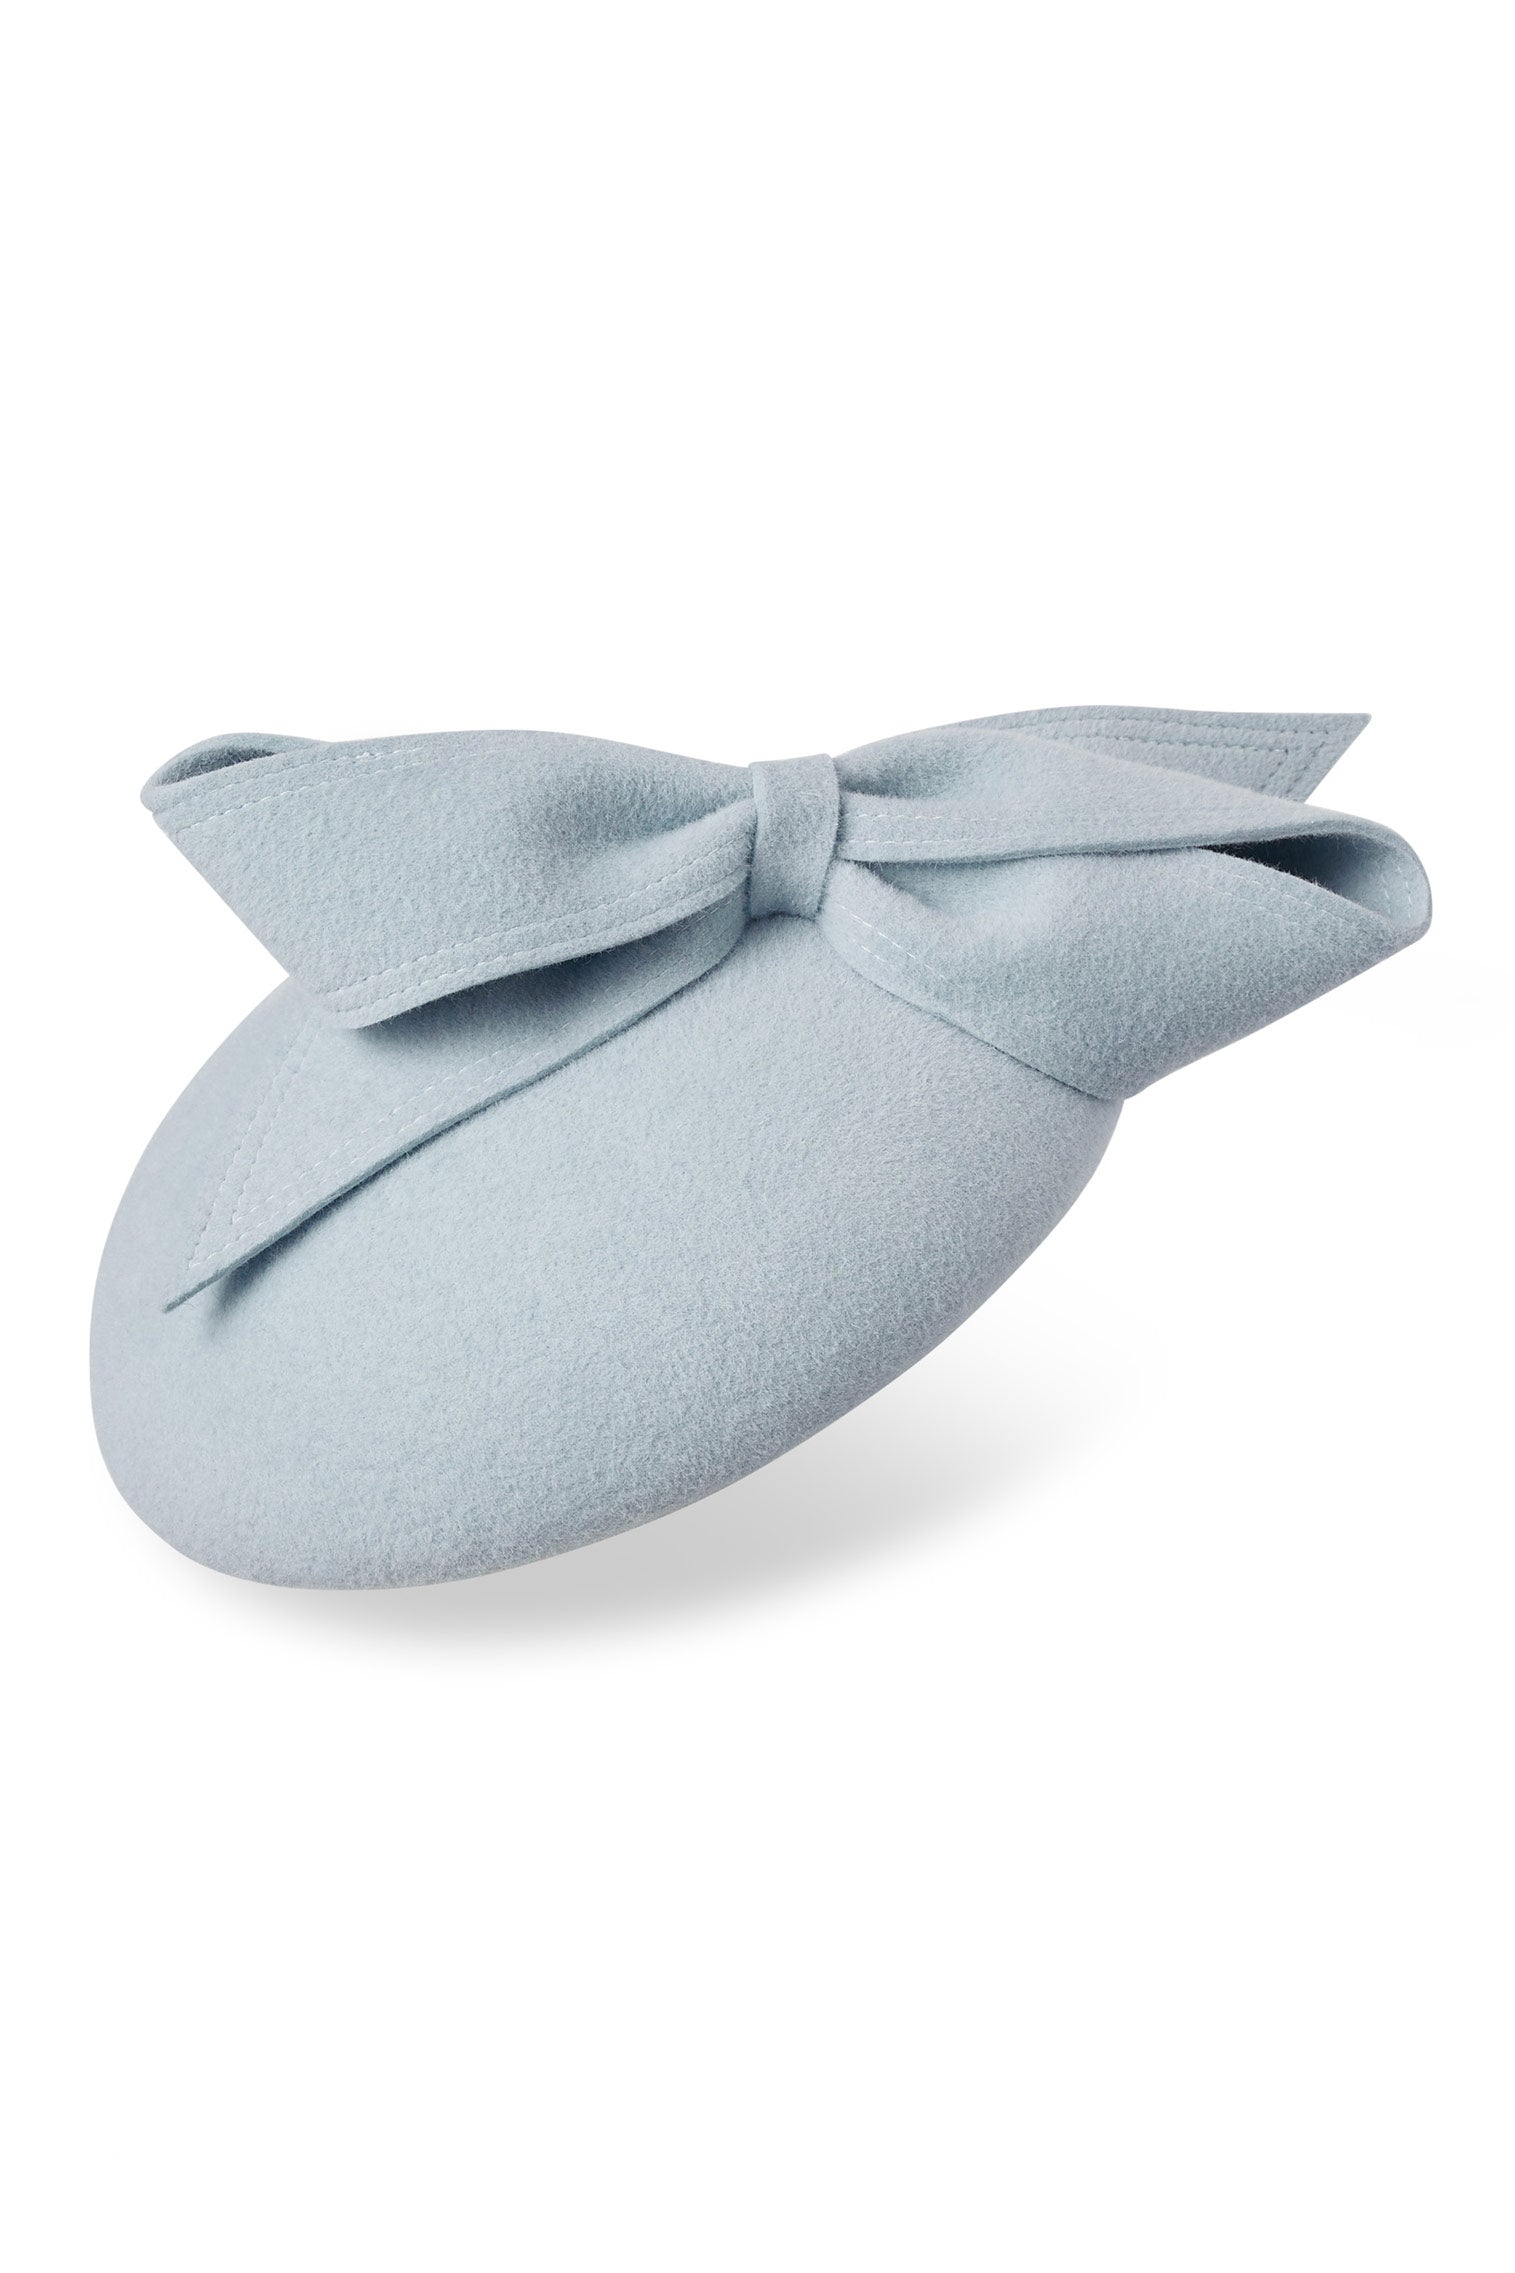 Lana Light Blue Button Hat - Lock Couture by Awon Golding - Lock & Co. Hatters London UK